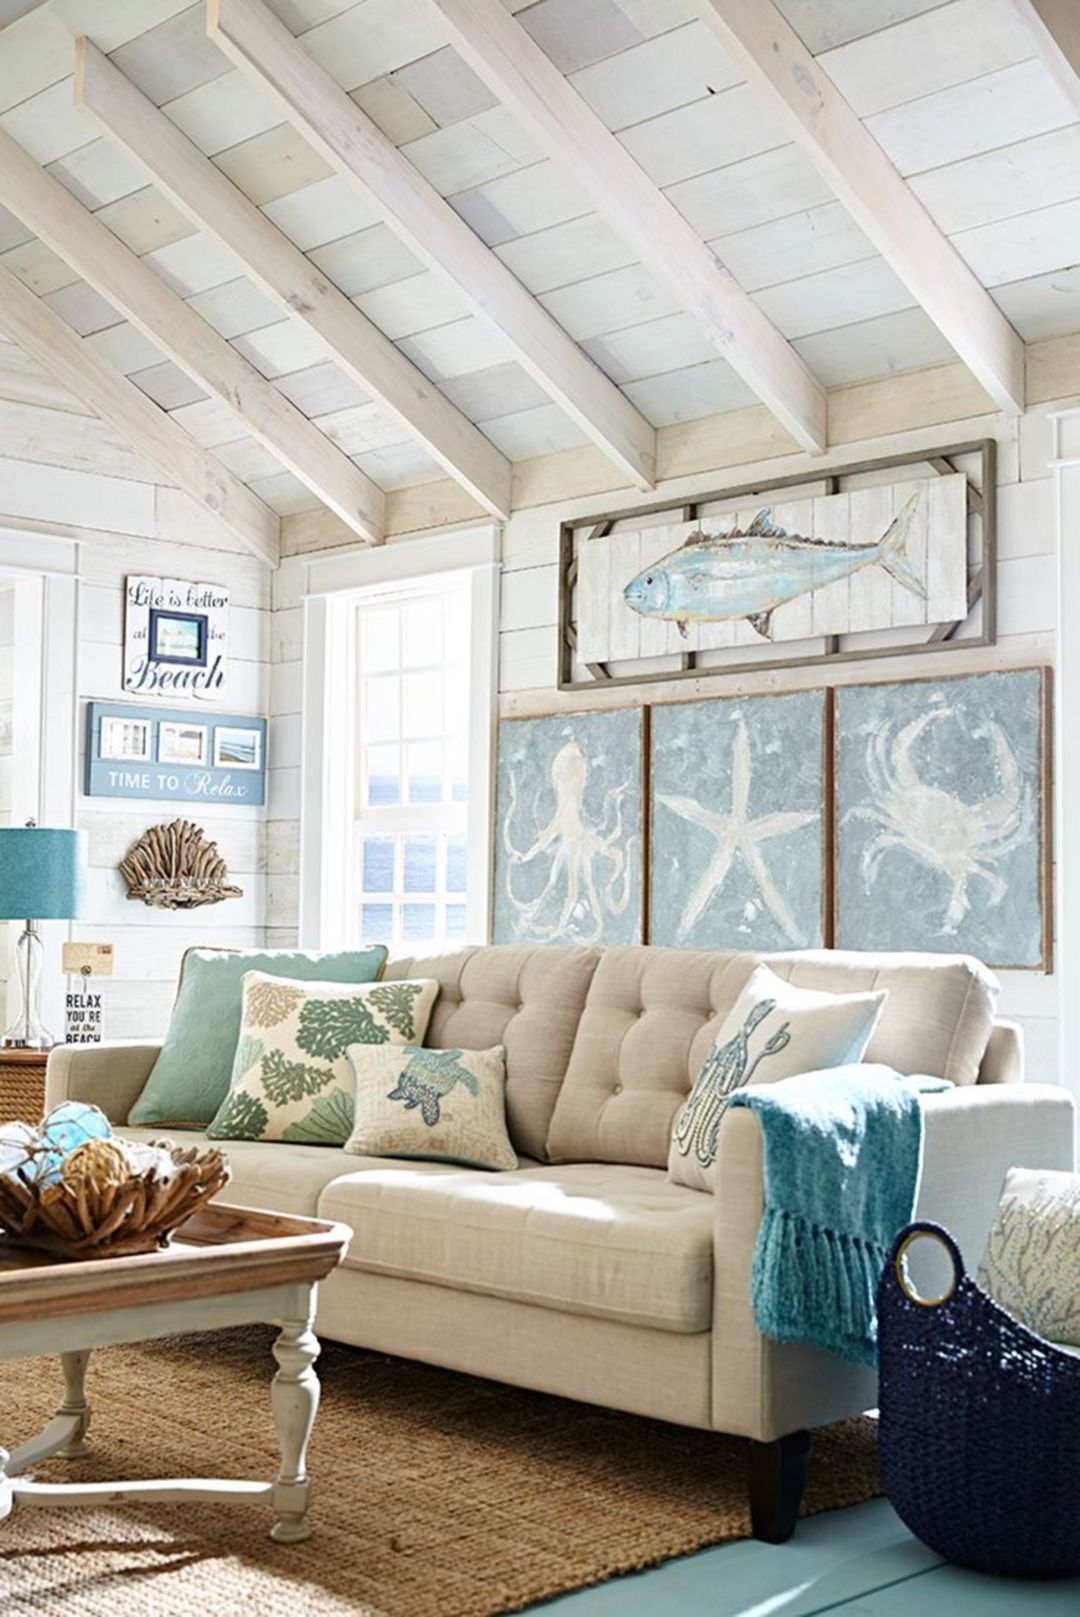 Furniture For A Coastal themed Room